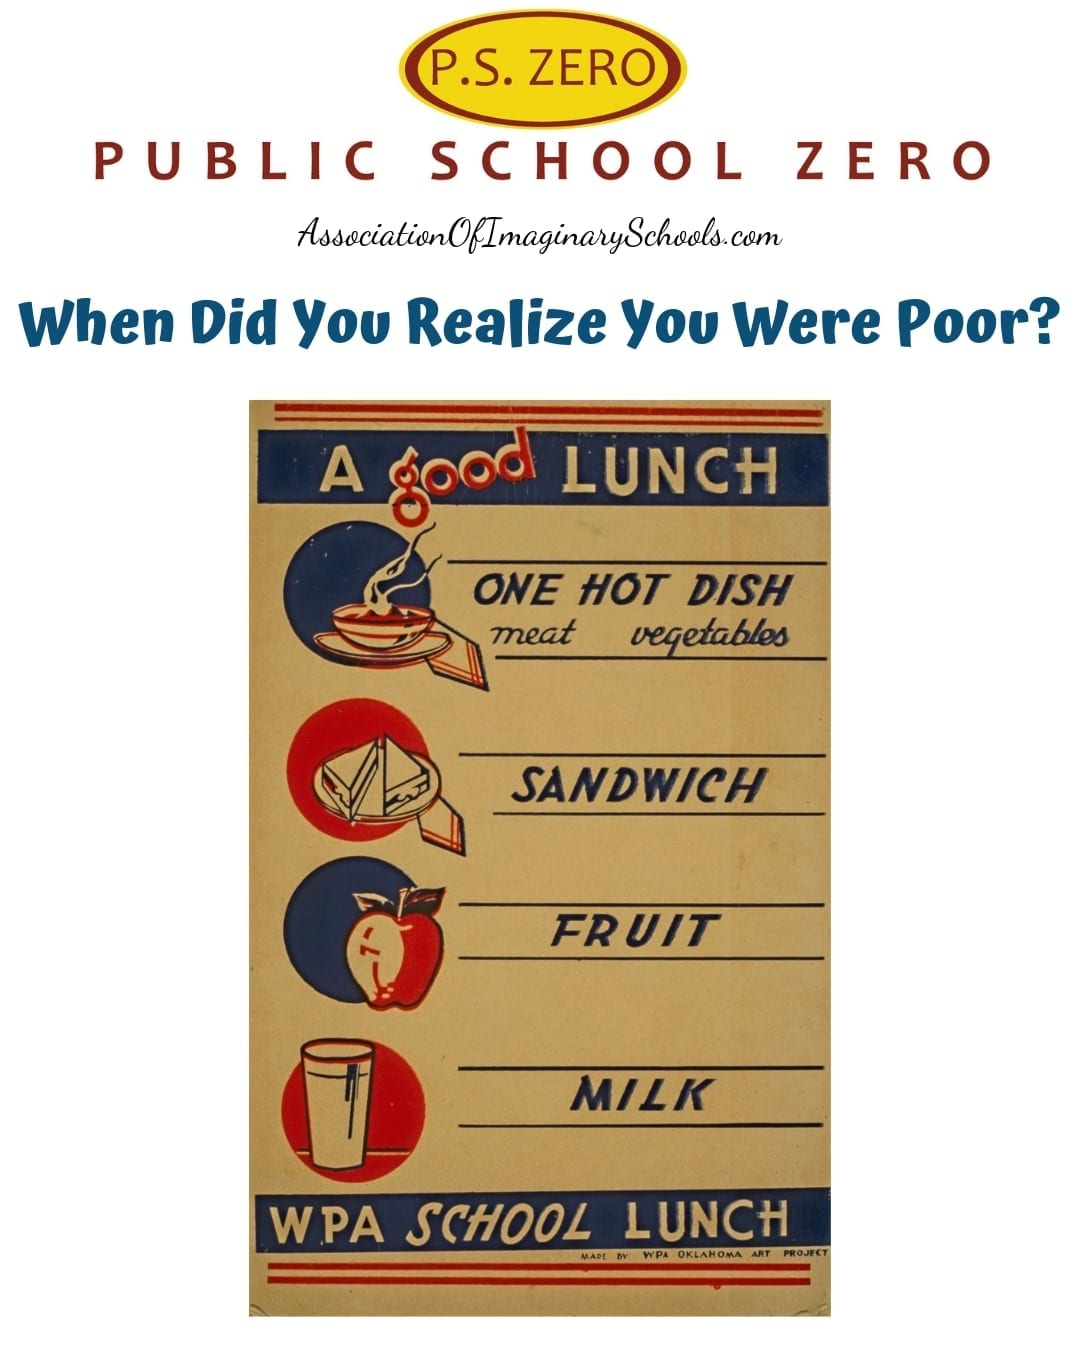 When Did You Realize You Were Poor?